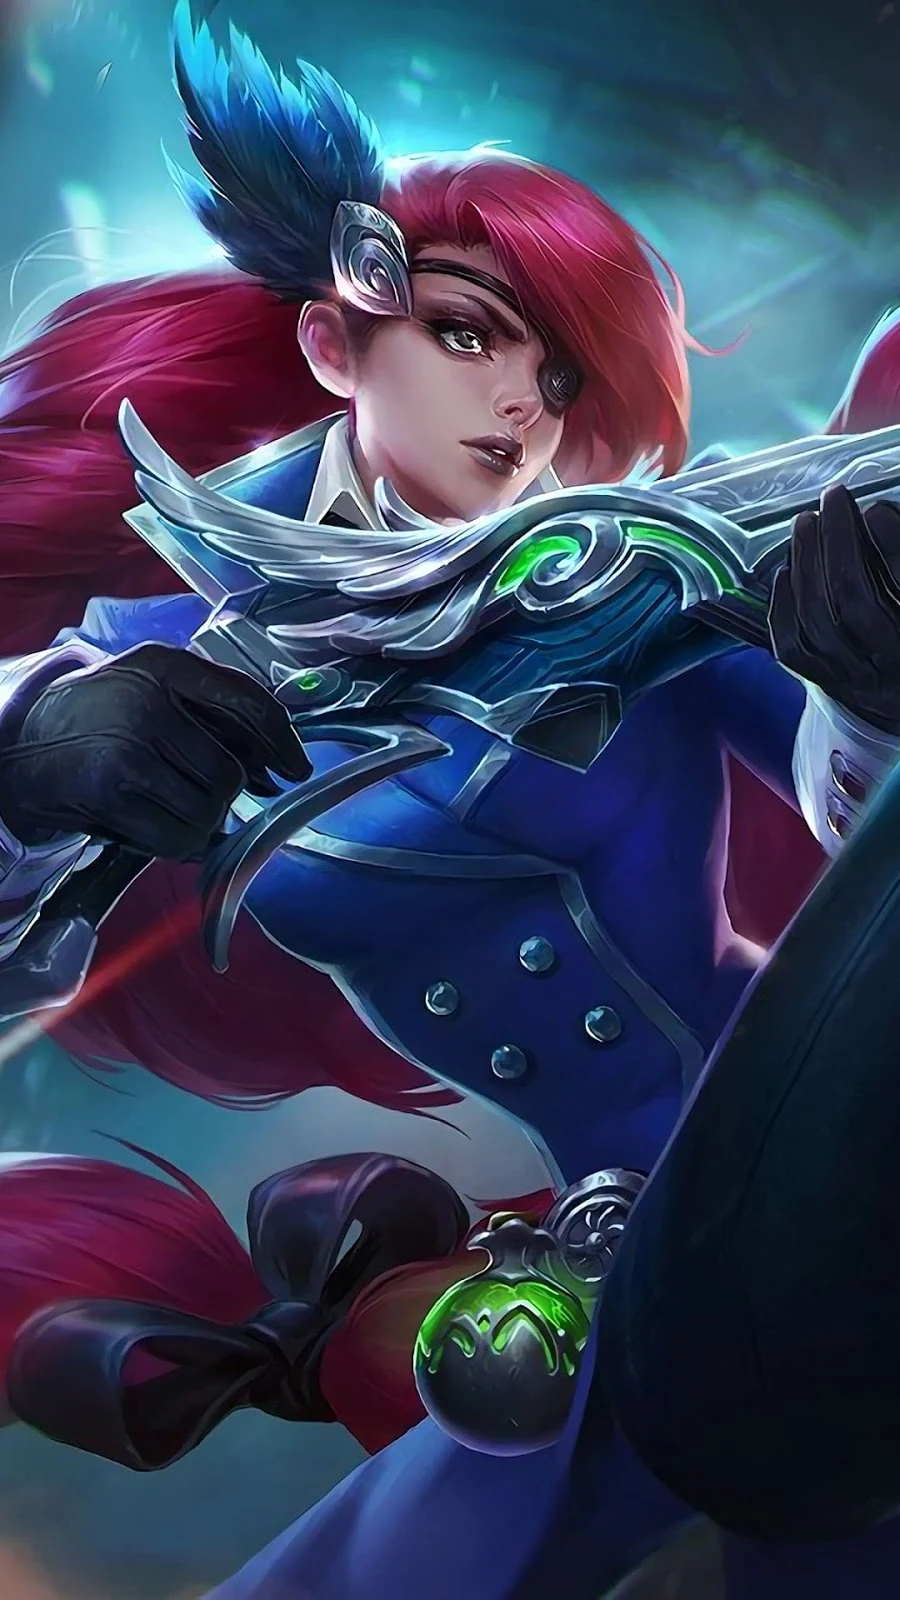 Photo#8 10+ Wallpaper Lesley Mobile Legends (ML) Full HD for PC, Android & iOS